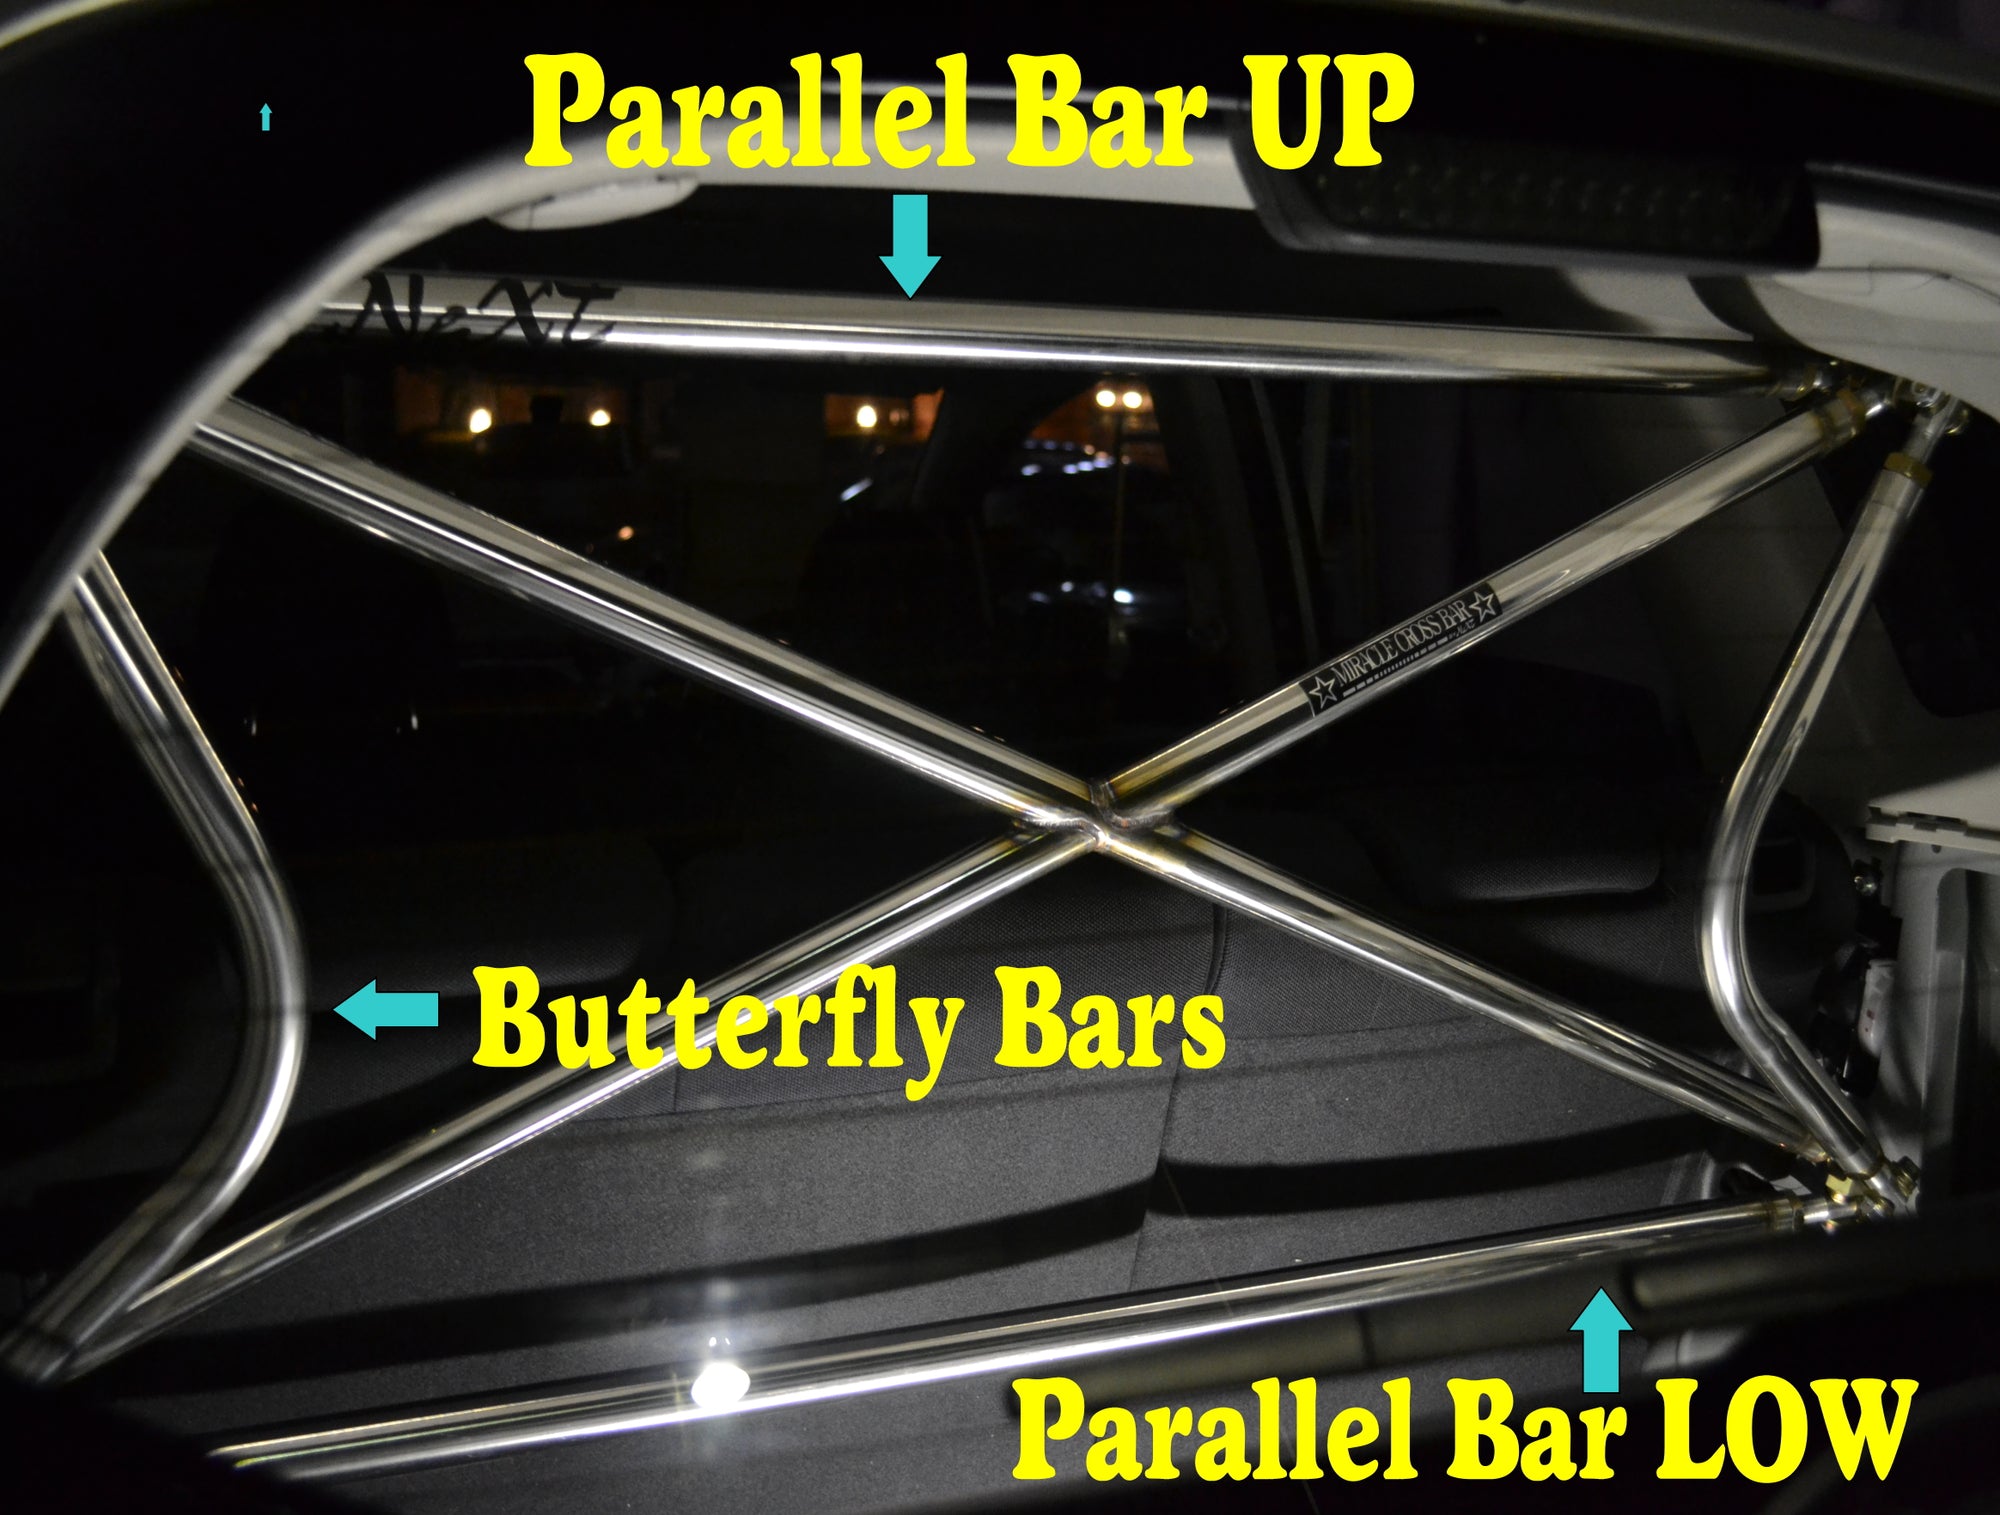 NEXT MIRACLE CROSS BAR PARALLEL BAR UP STAINLESS 35 FOR SUZUKI ALTO HA36 C P NEXT-01411